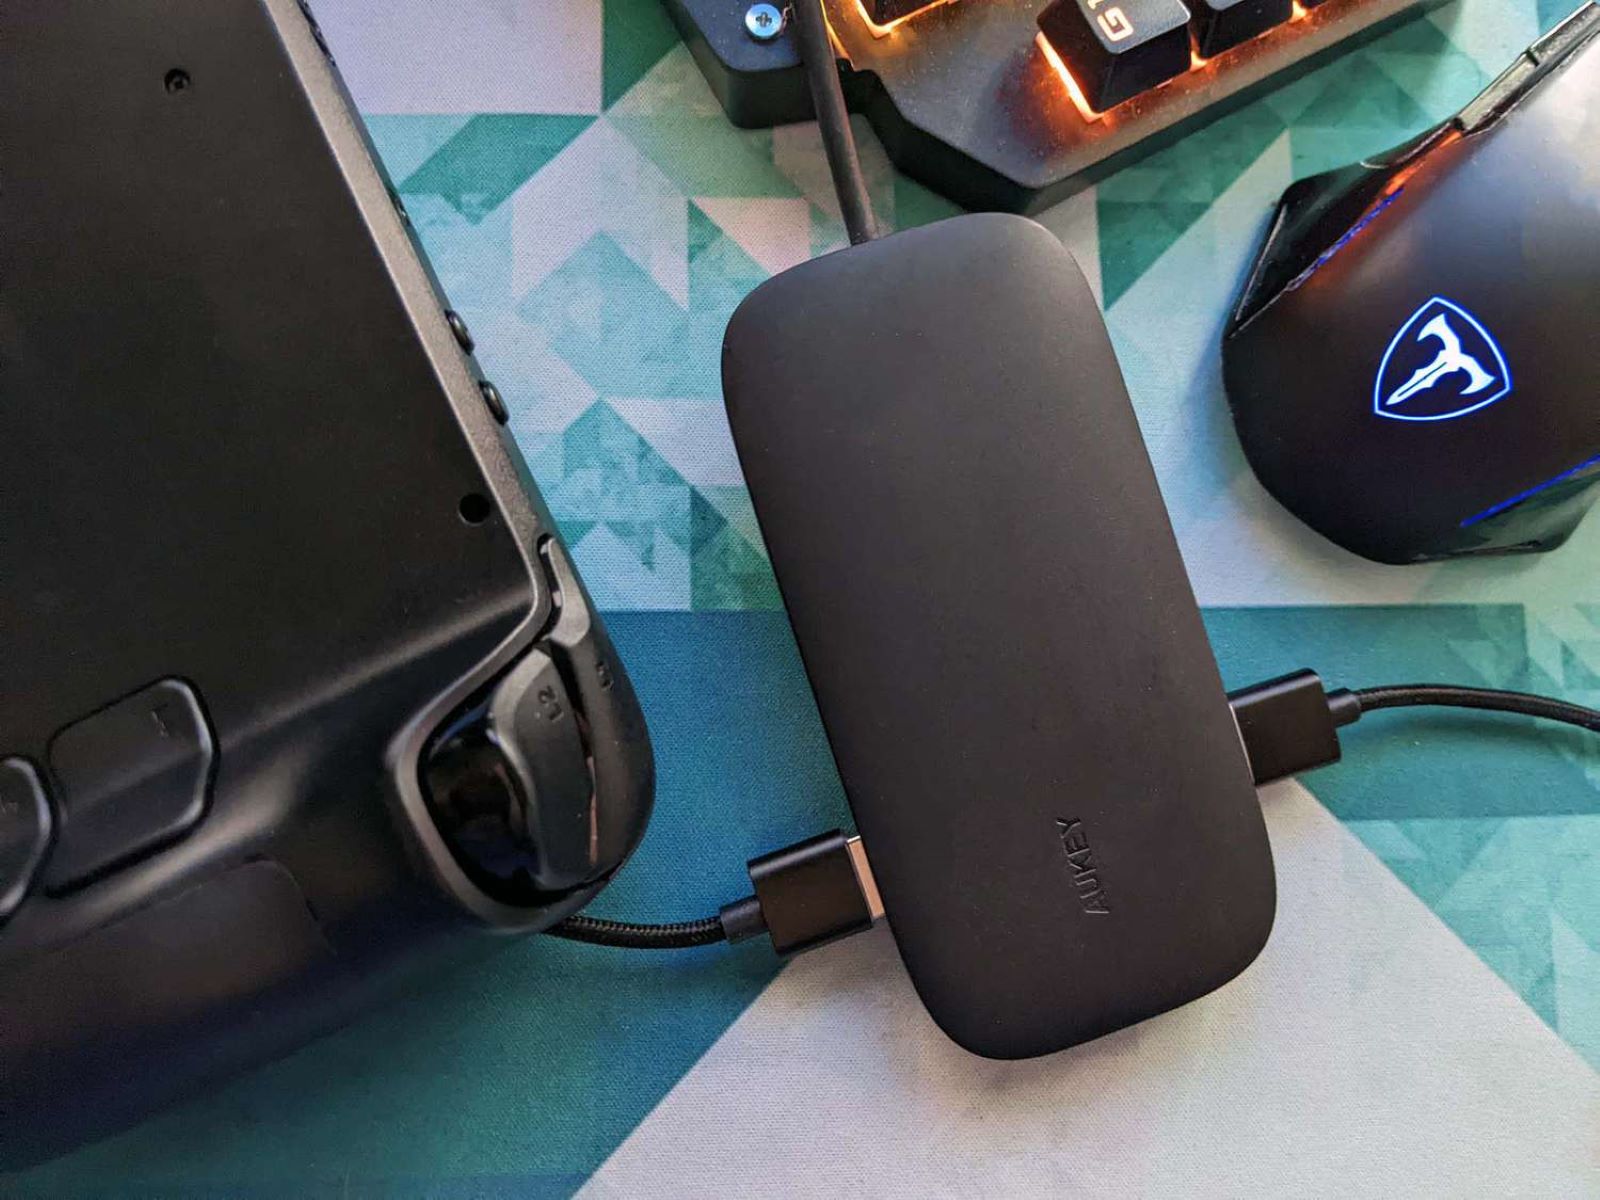 How To Identify Which USB Hub My Mouse Is Connected To